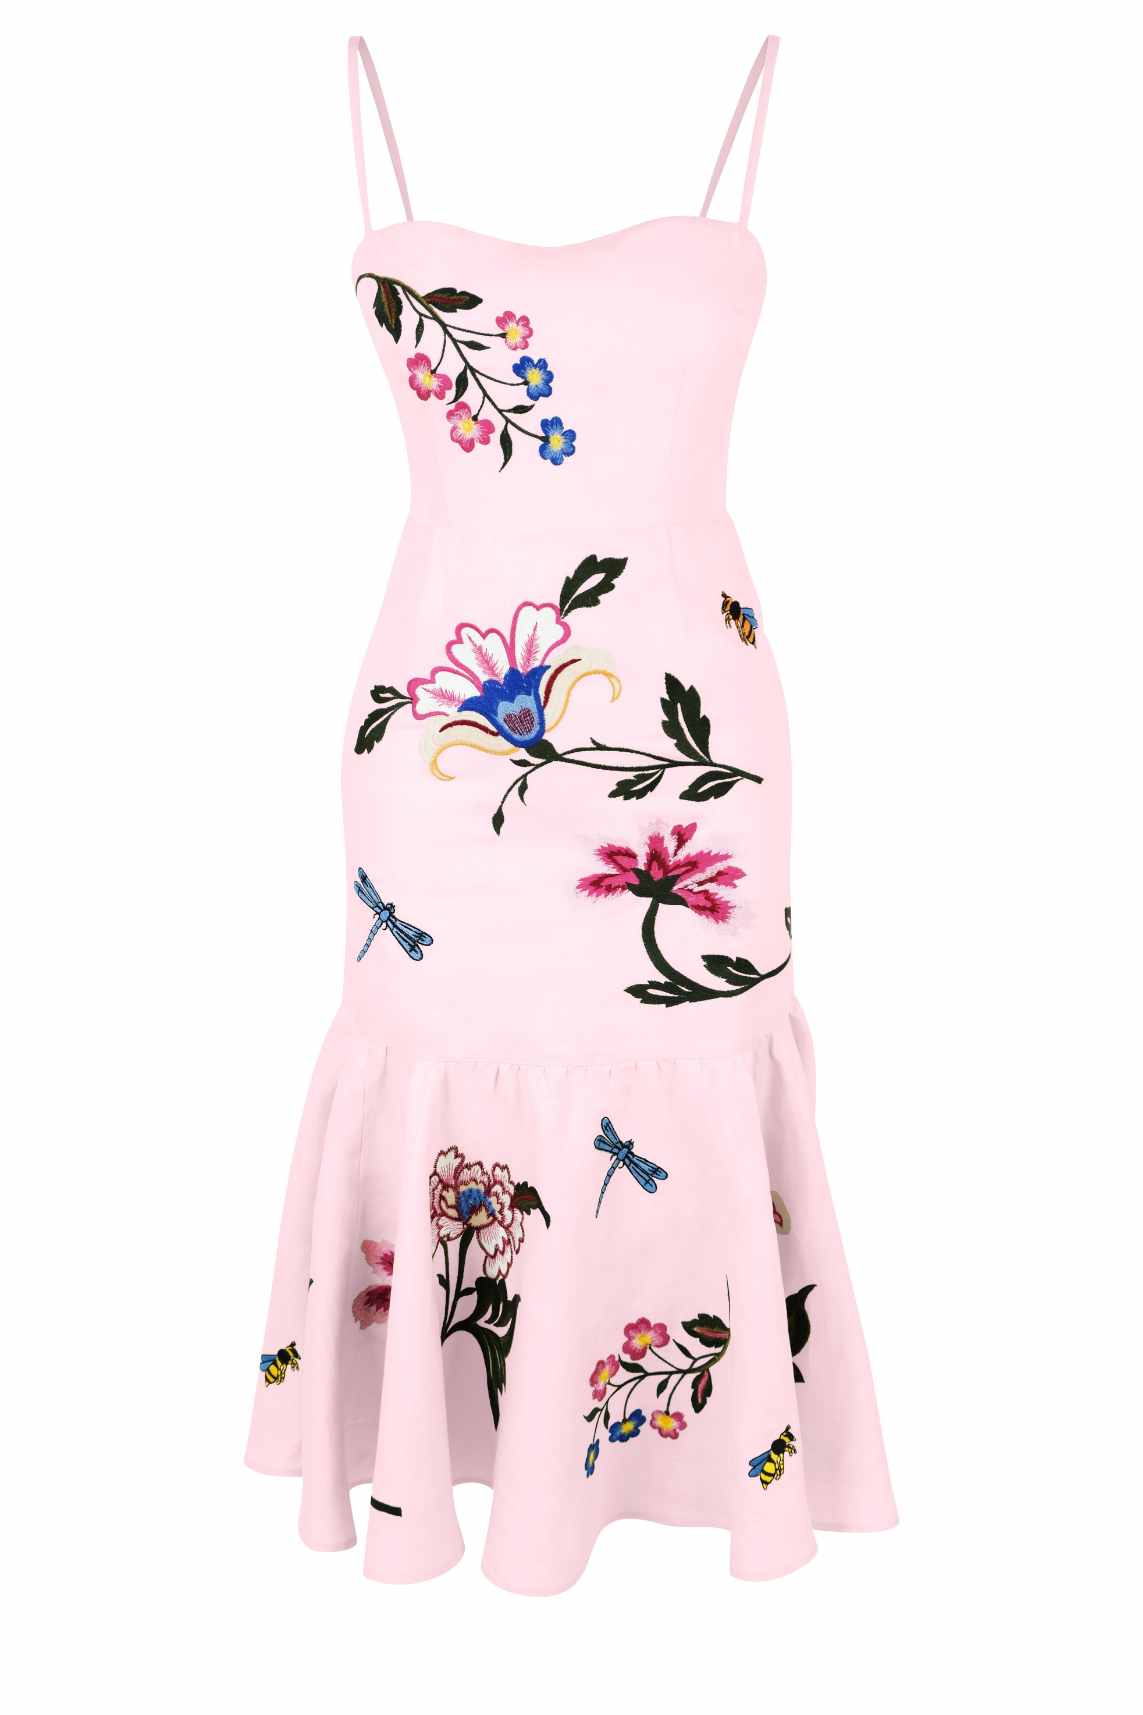 Fanm Mon x Over the Moon Alice Dress in Light Pink